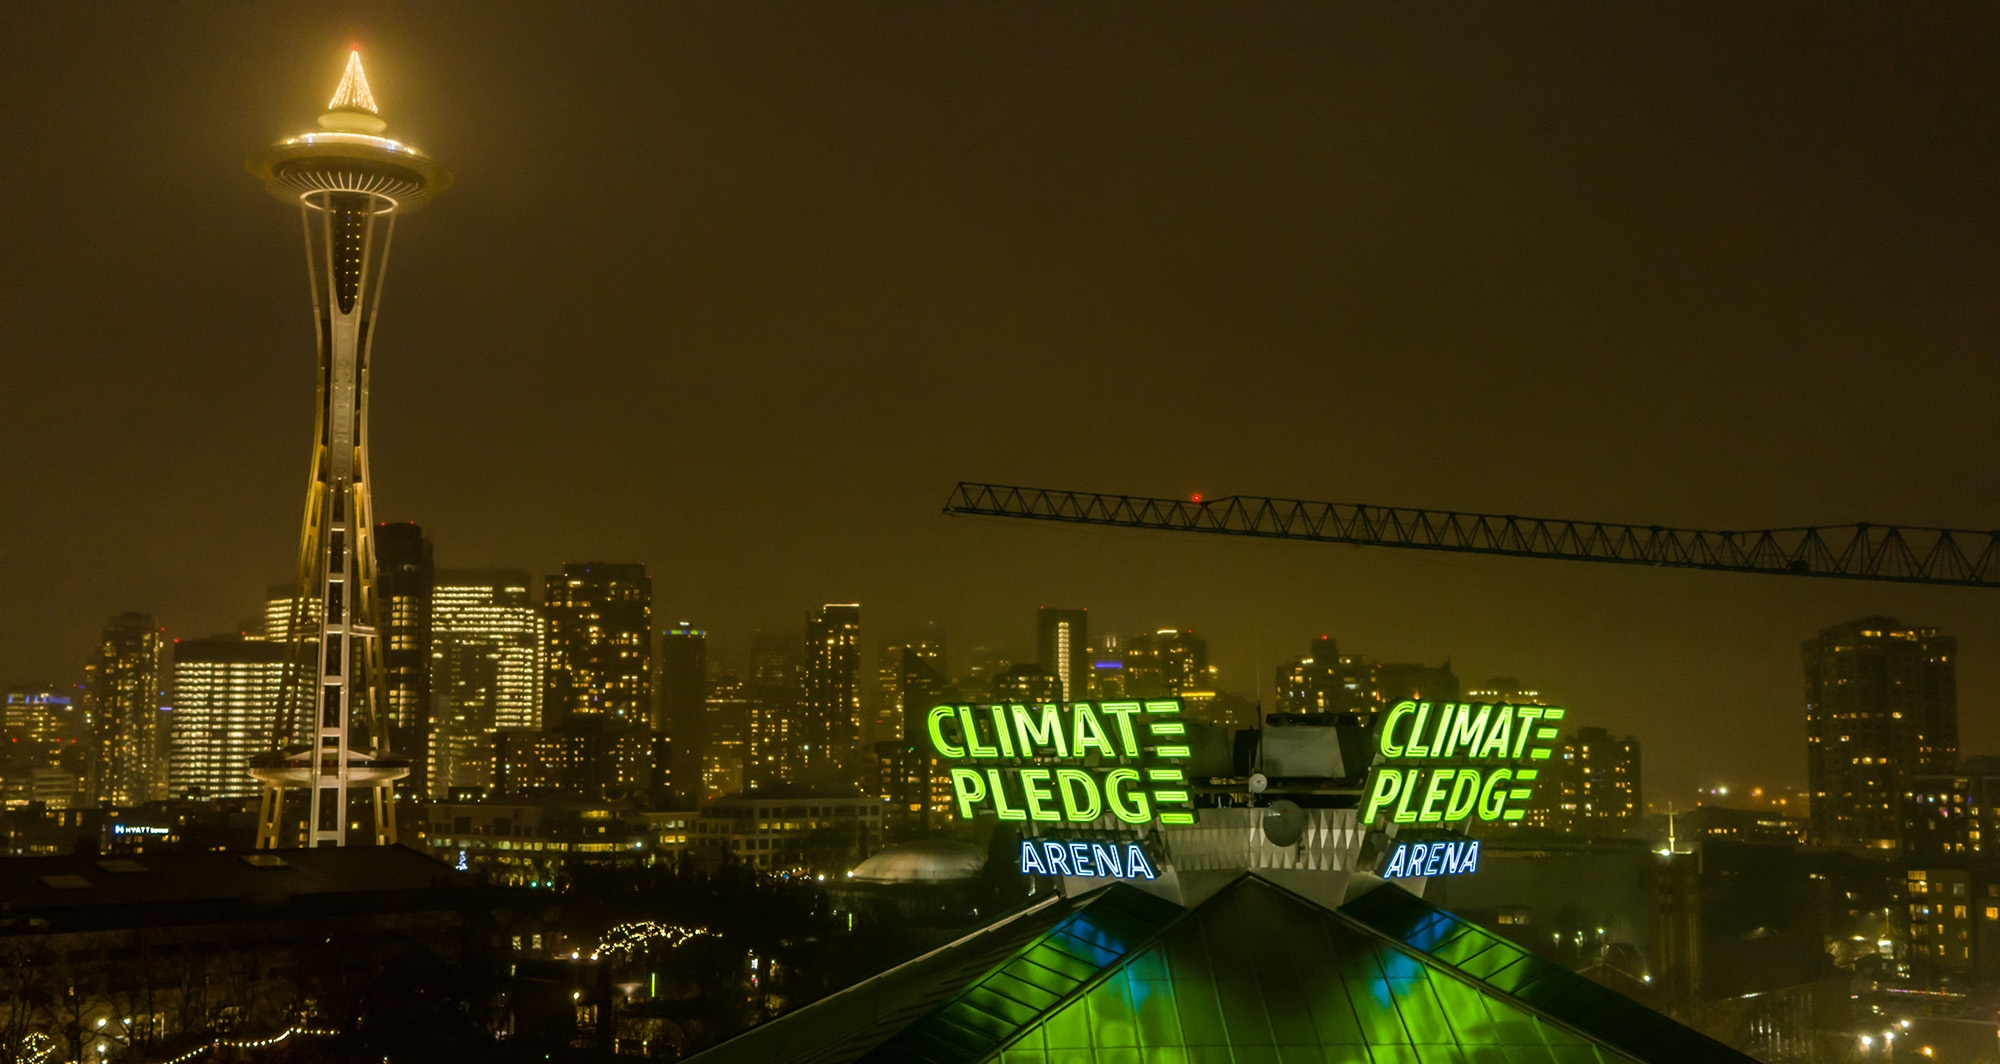 The Climate Pledge Arena signage lit up, with Seattle's Space Needle and skyline showing behind it.